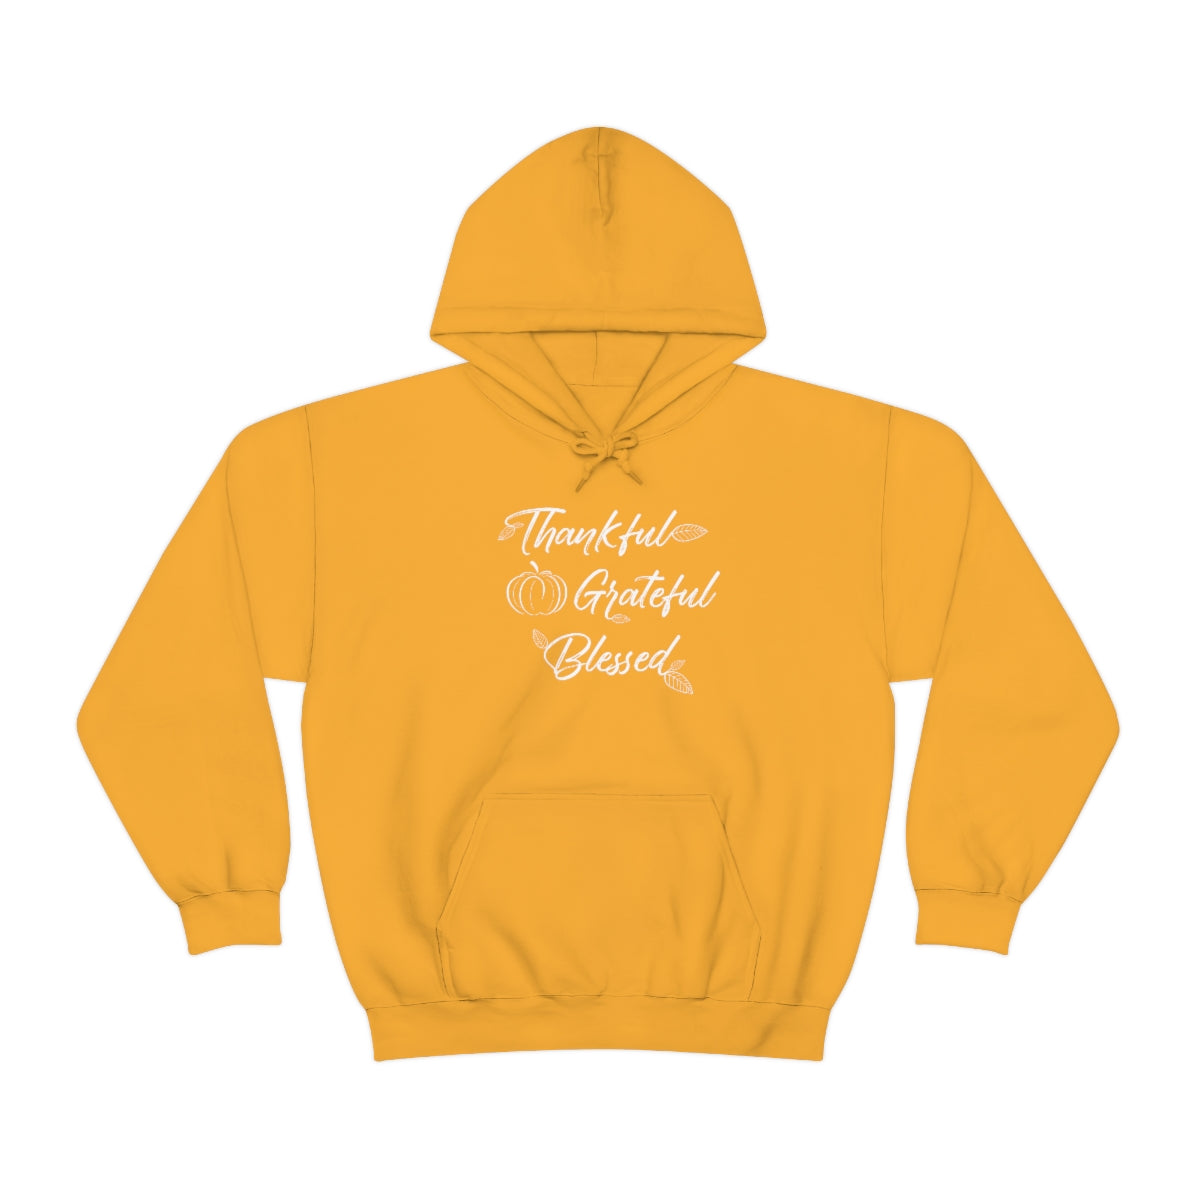 Thankful- Hooded Sweatshirt(Available in more colors)